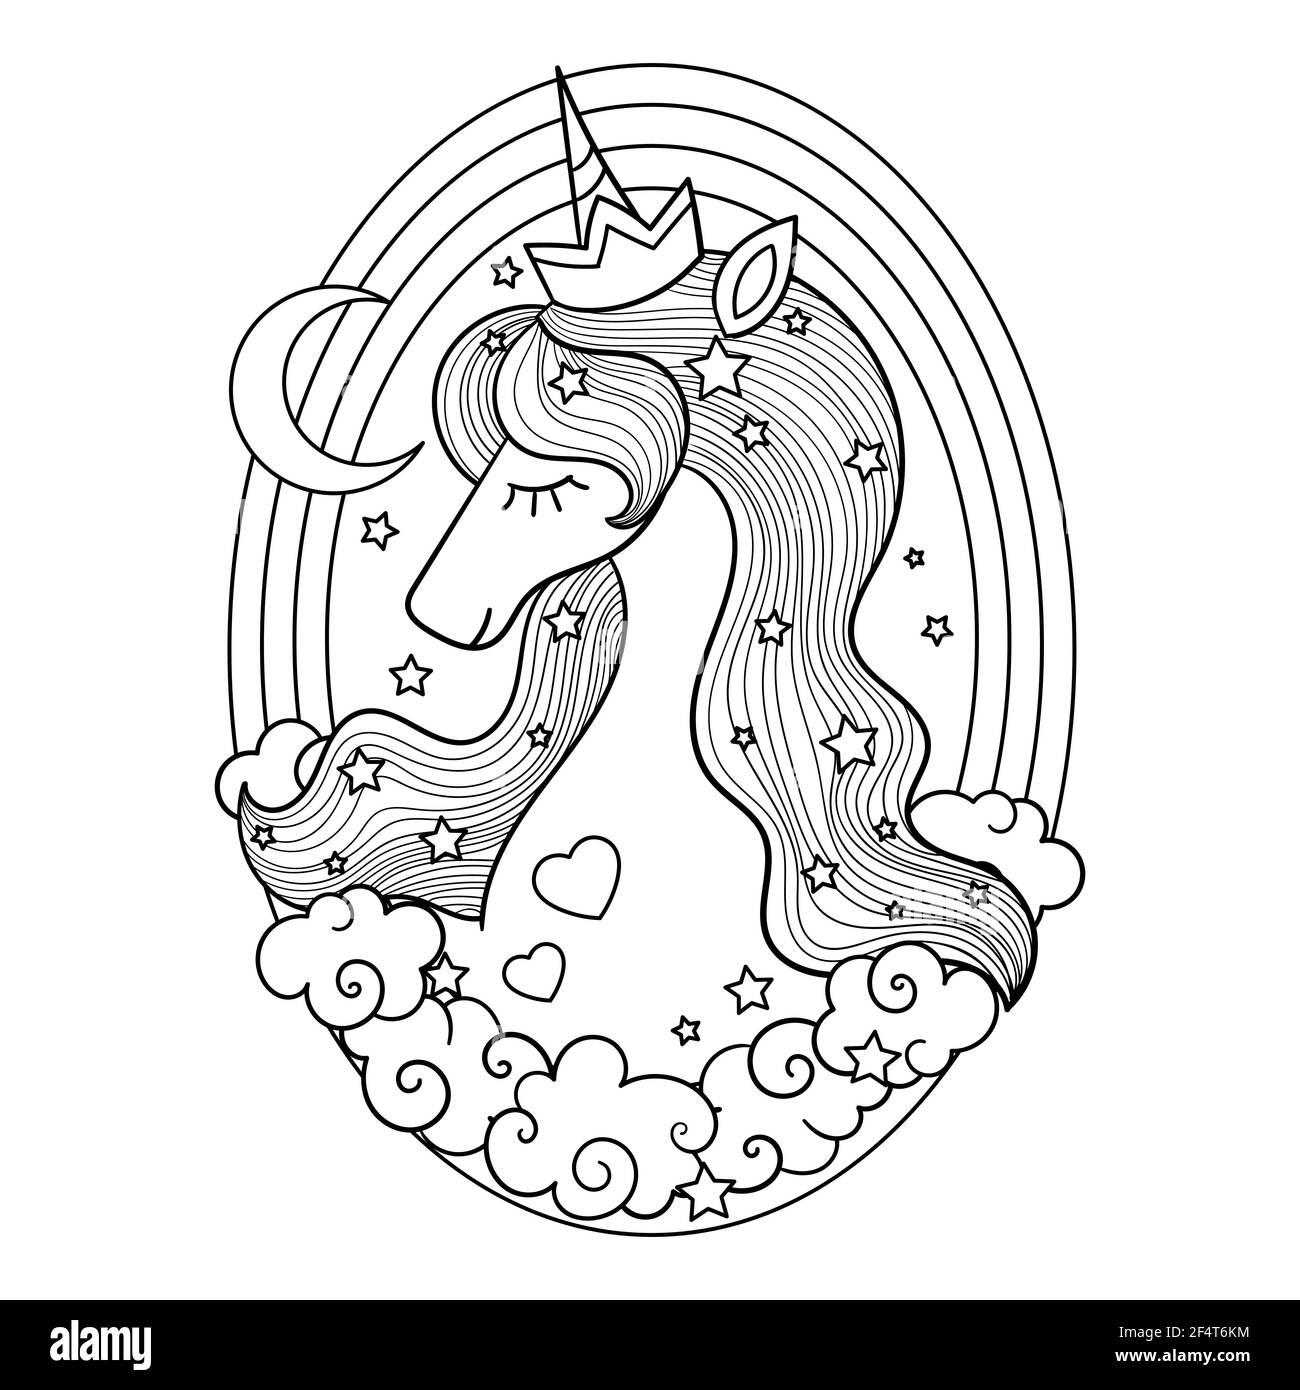 Cute unicorn head and rainbow. Black and white linear illustration for coloring. Vector Stock Vector